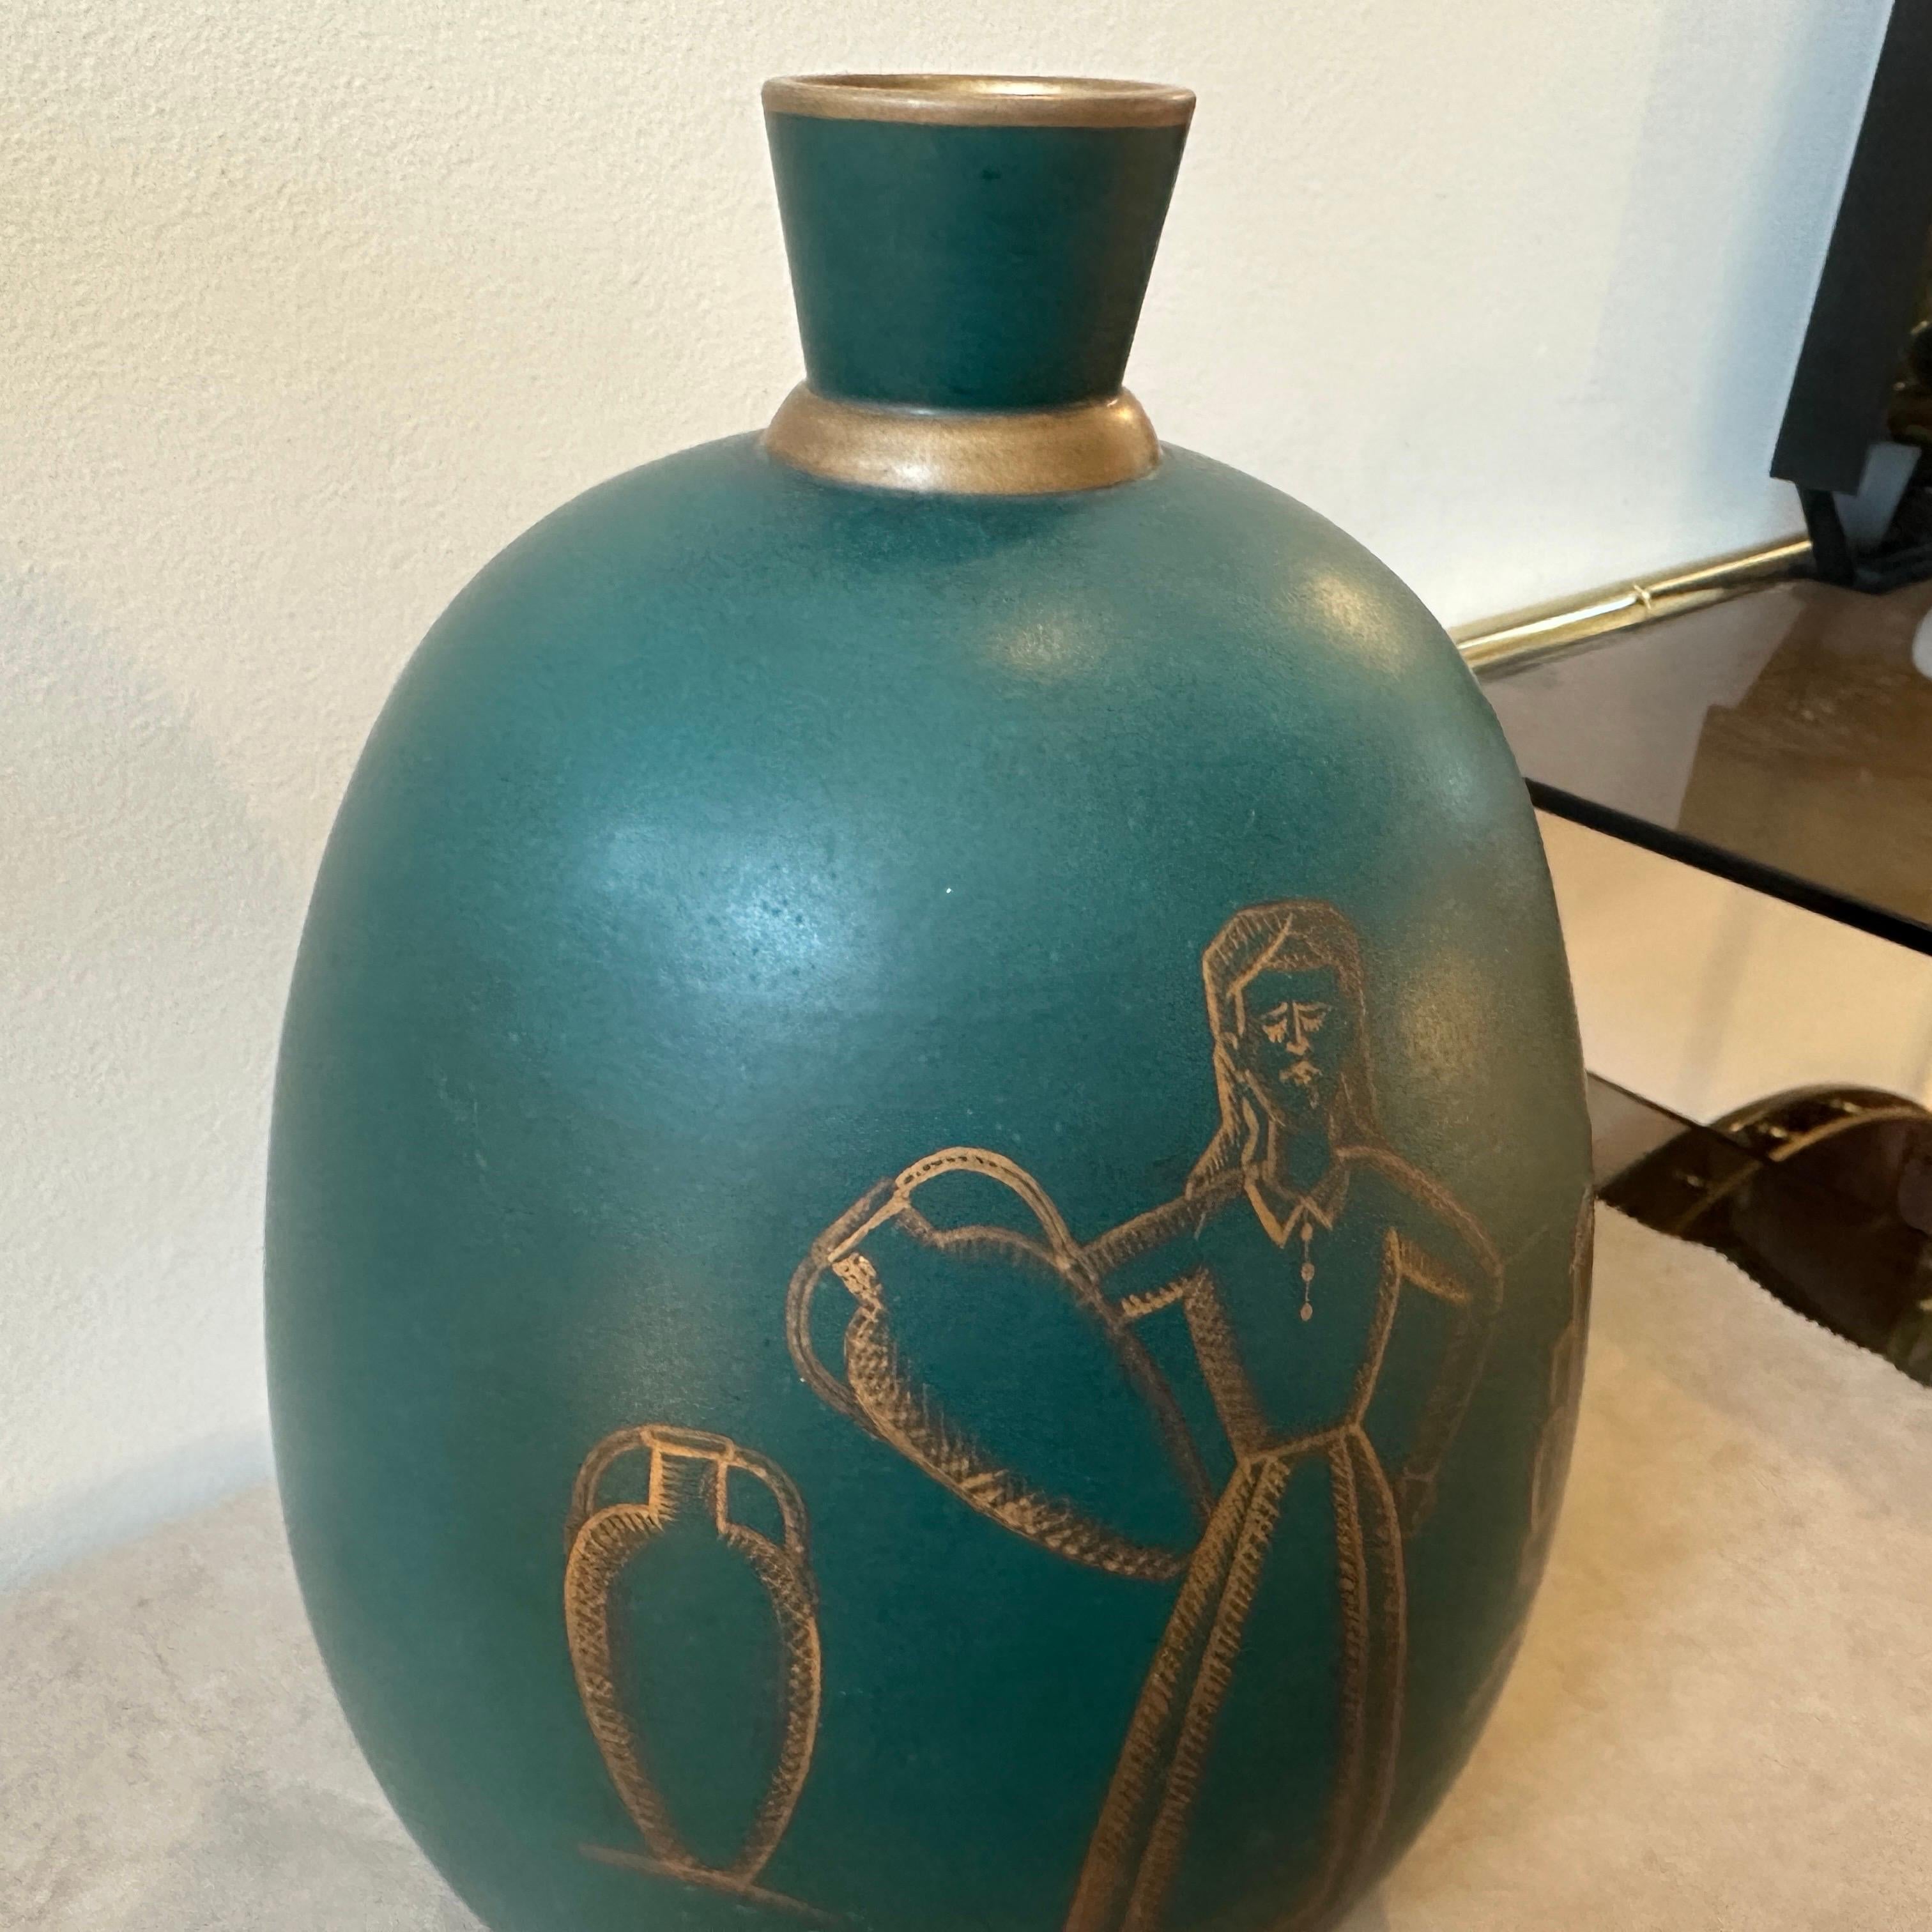 A 1939 Dated Art Deco Gio Ponti Inspired Green and Gold Ceramic Sicilian Vase For Sale 3